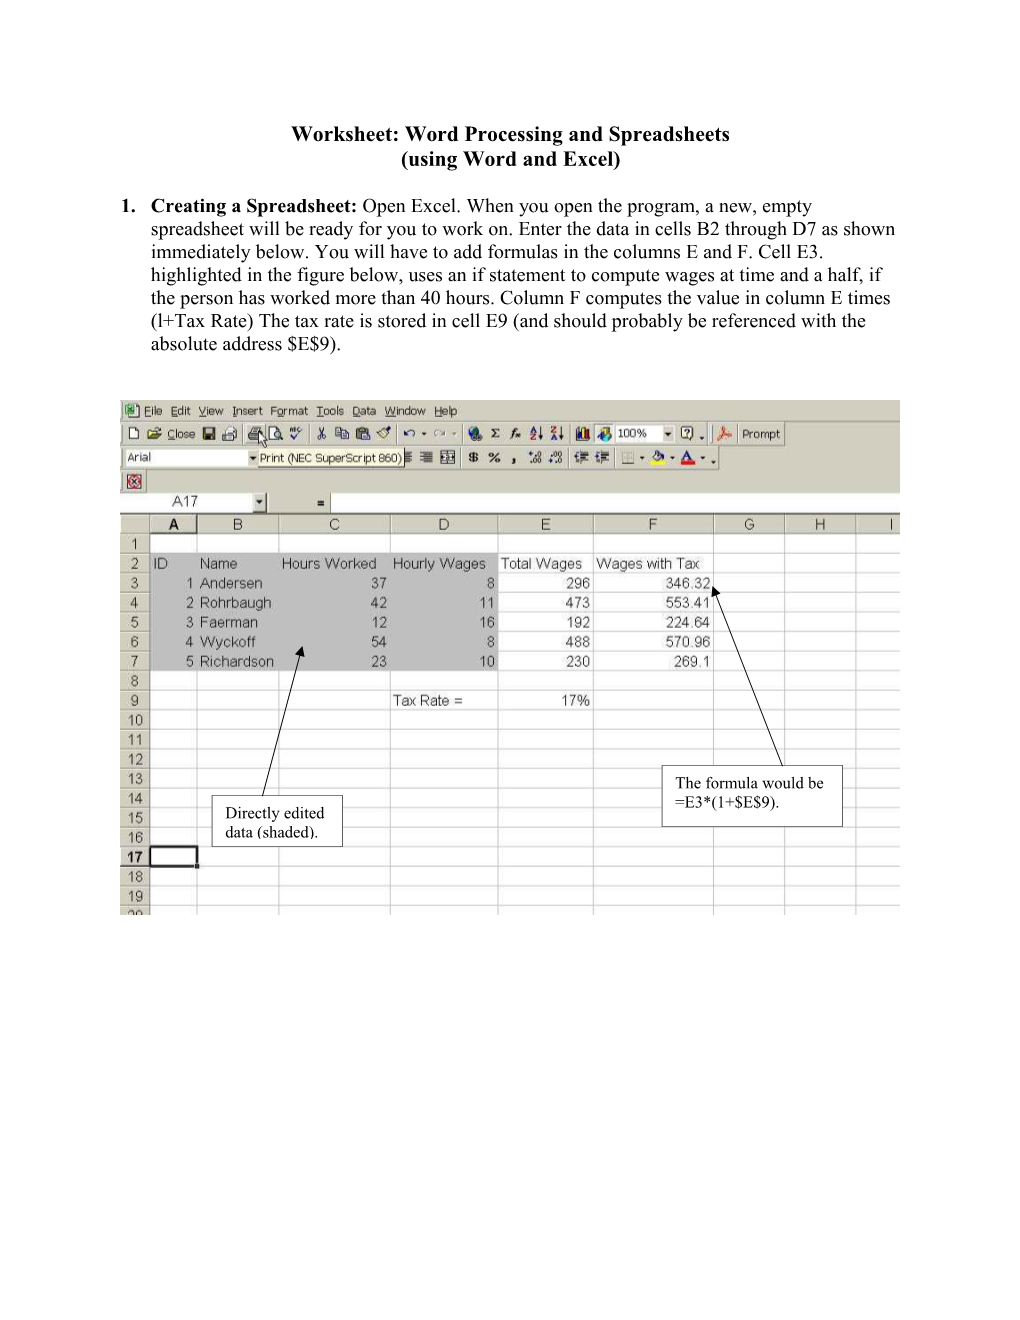 Worksheet: Word Processing and Spreadsheets